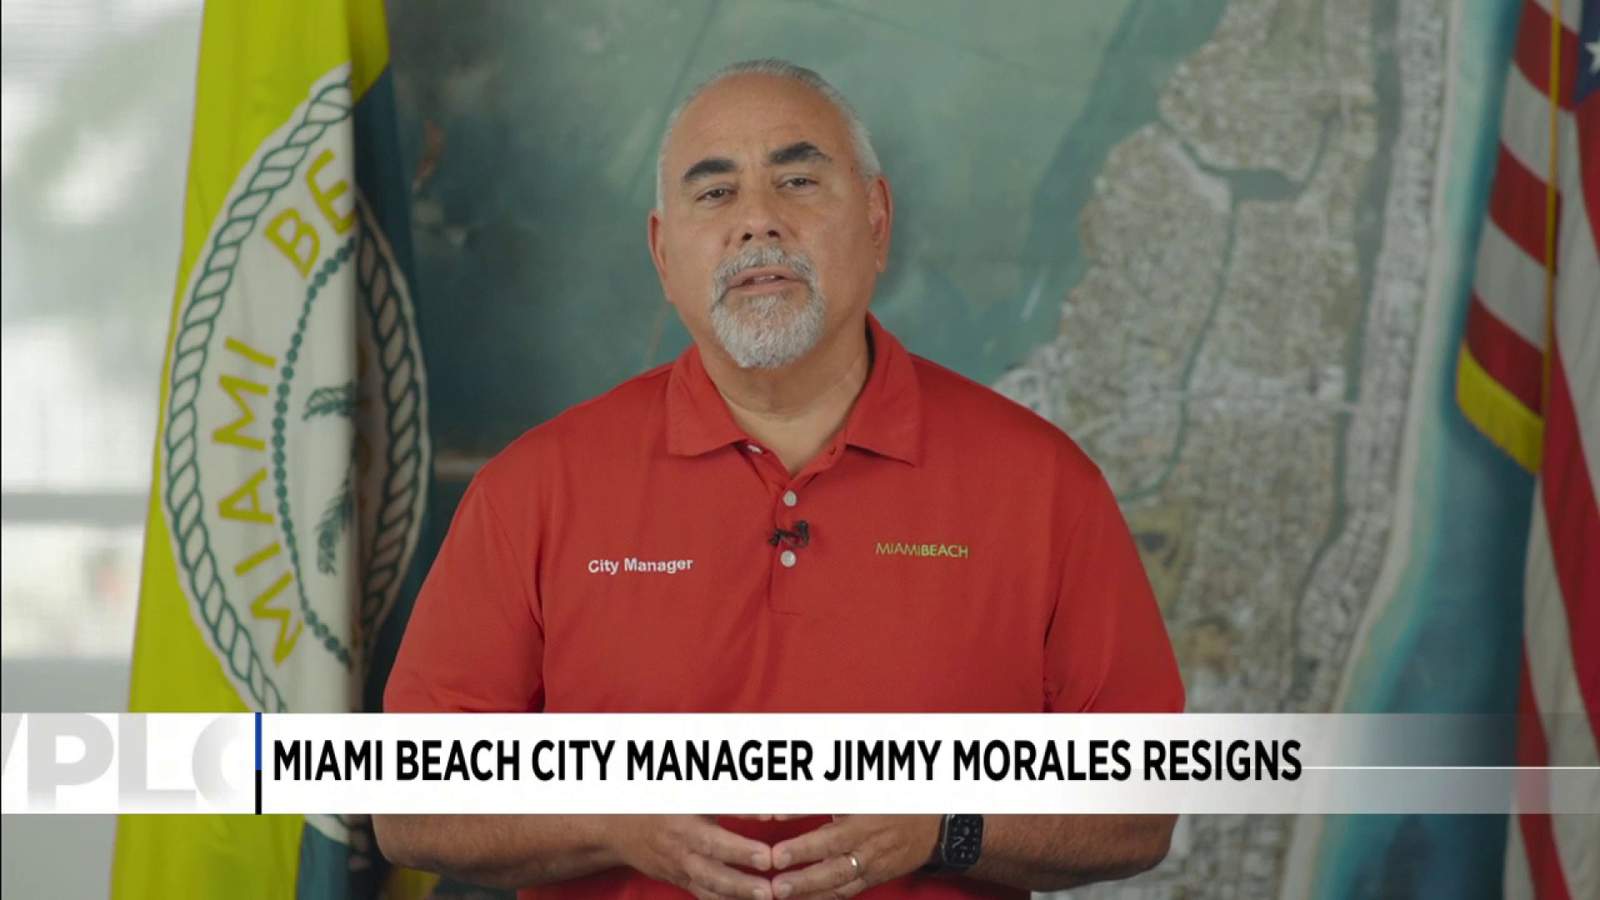 Miami Beach City Manager Jimmy Morales announces plan to resign